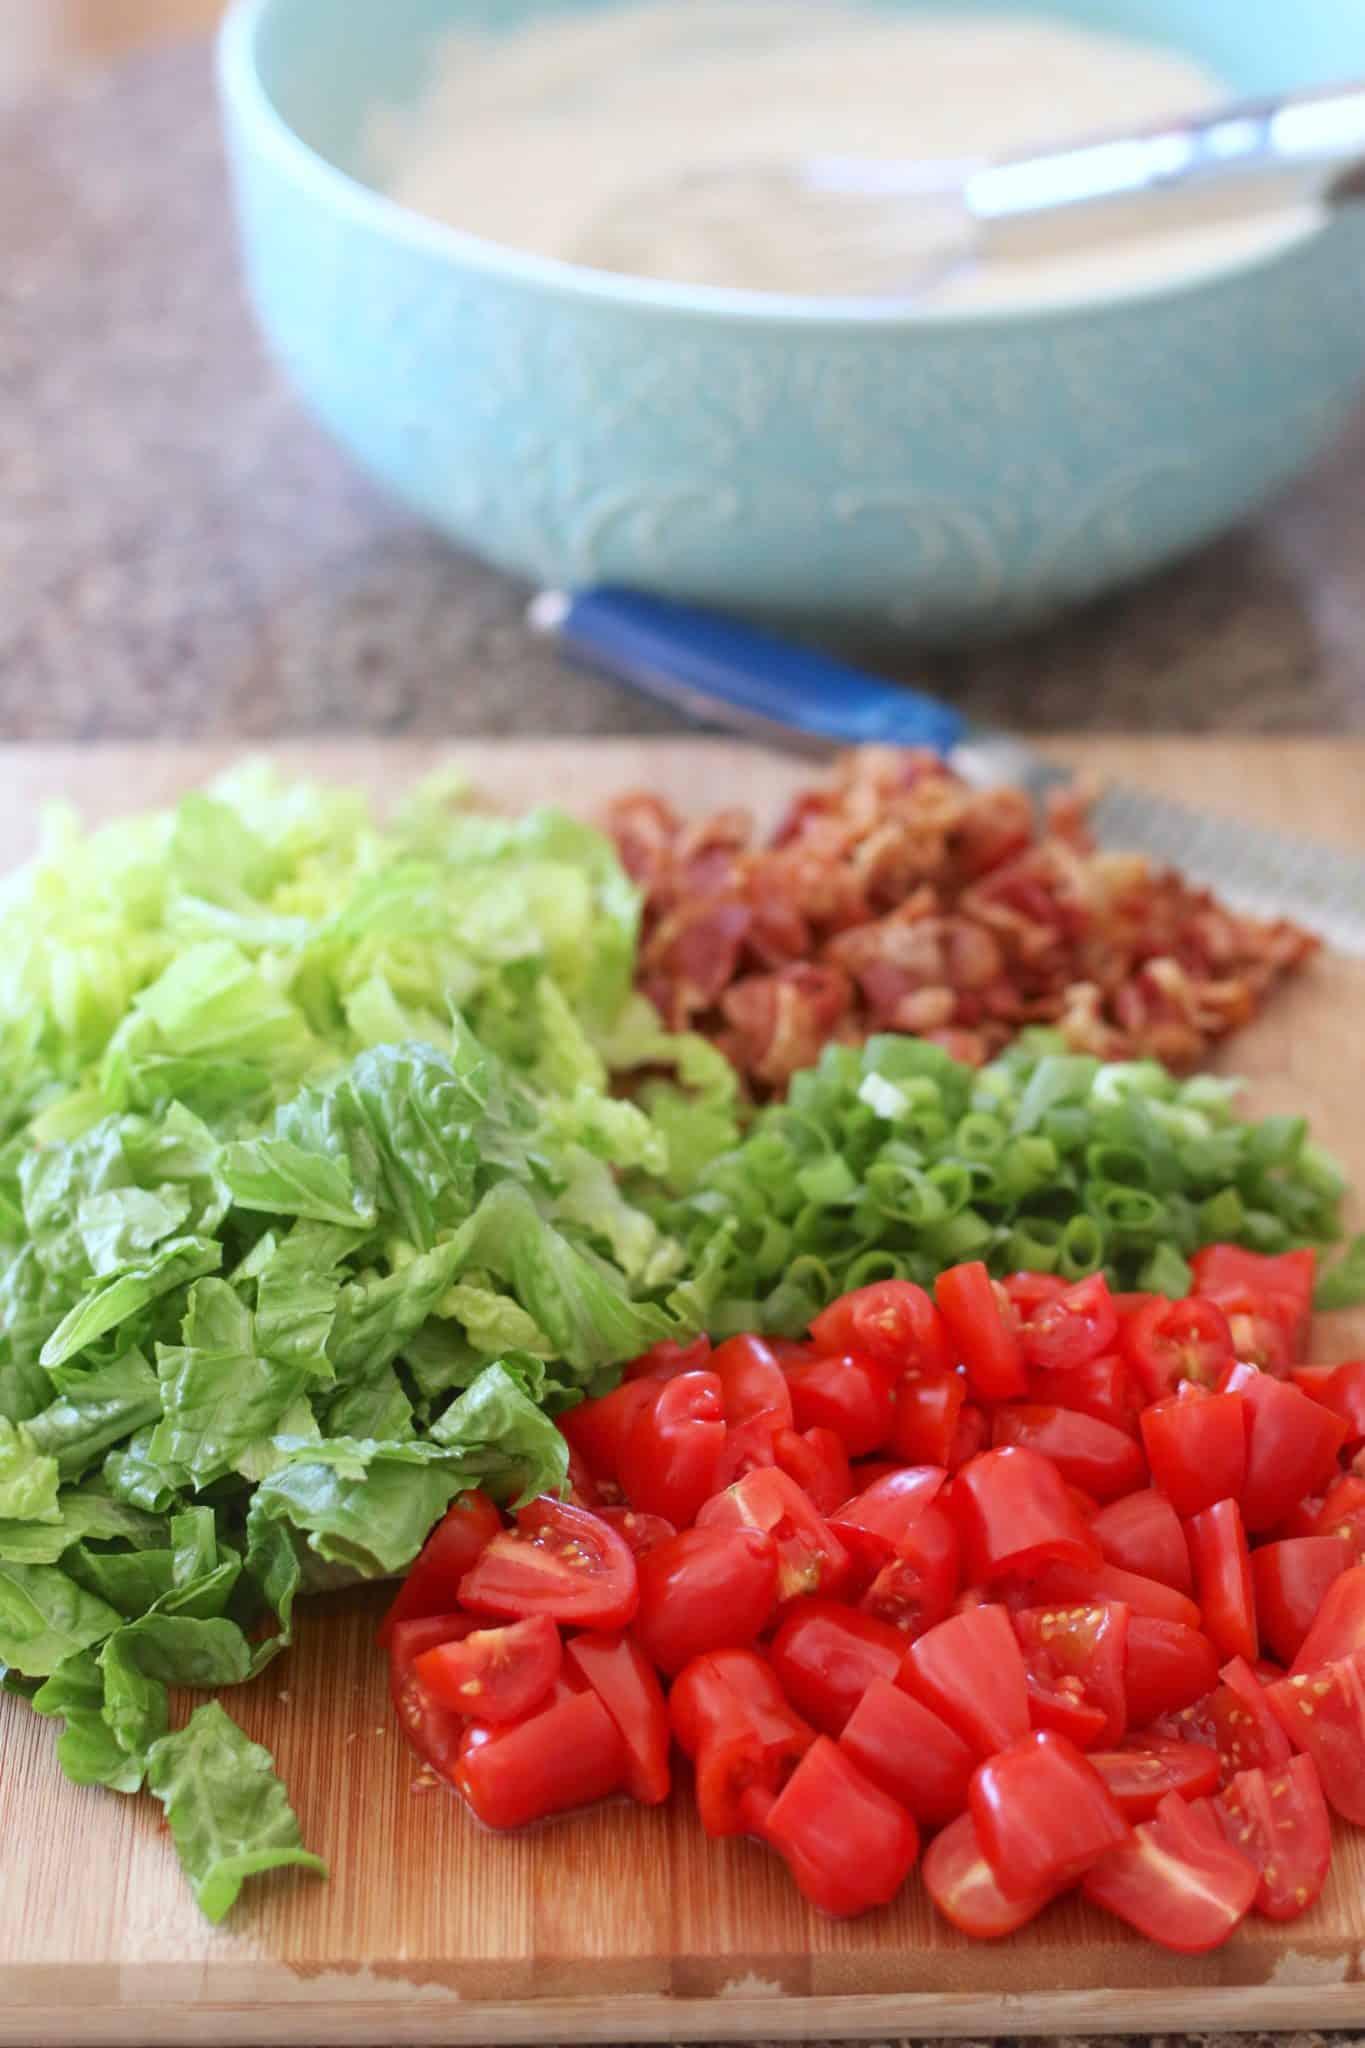 sliced cherry tomatoes, chopped romaine lettuce, chopped, cooked bacon on a wooden cutting board.